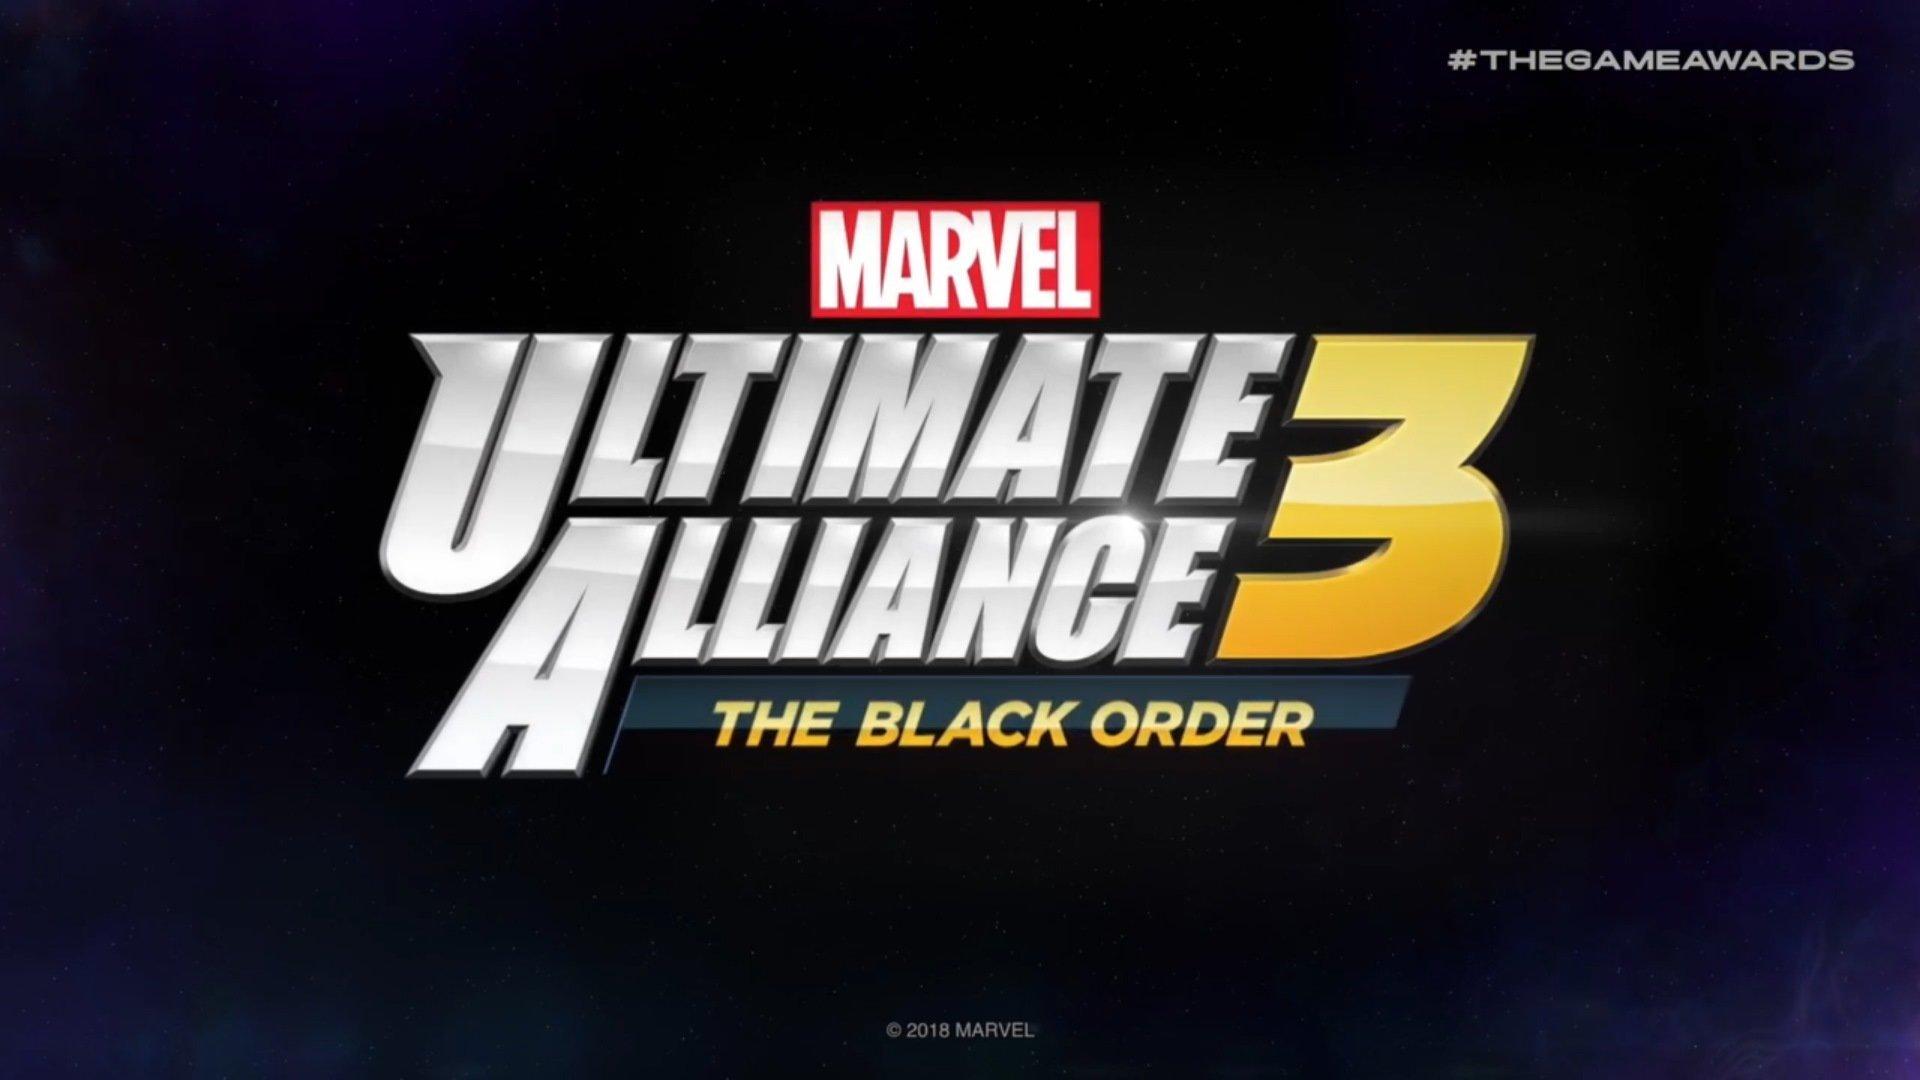 Marvel Ultimate Alliance 3 coming in 2019 exclusively for Nintendo